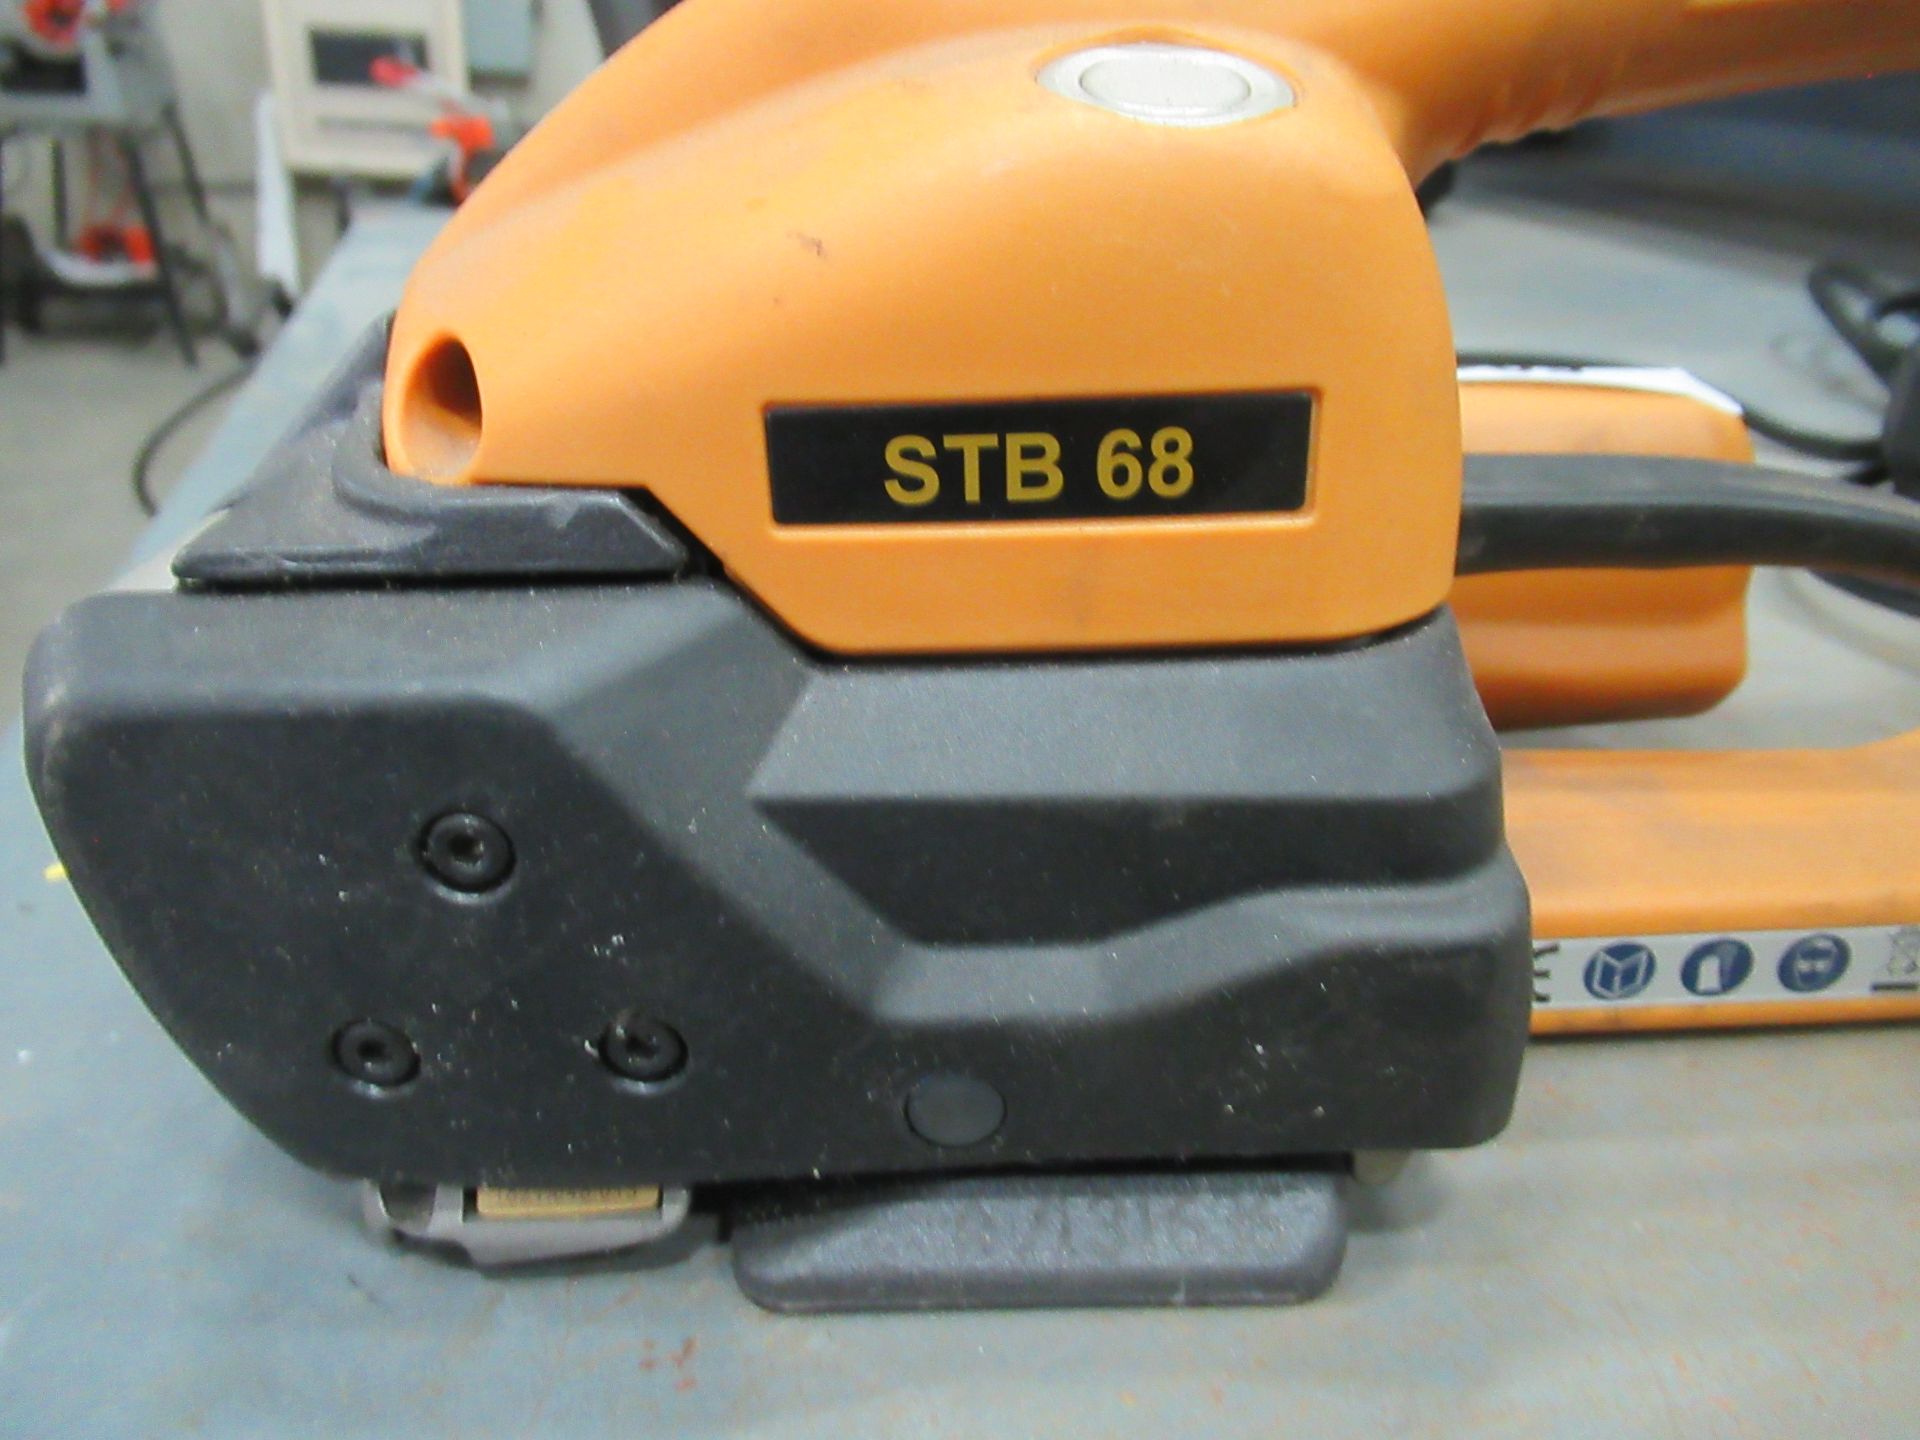 Handheld Strapping Tool - Image 2 of 3